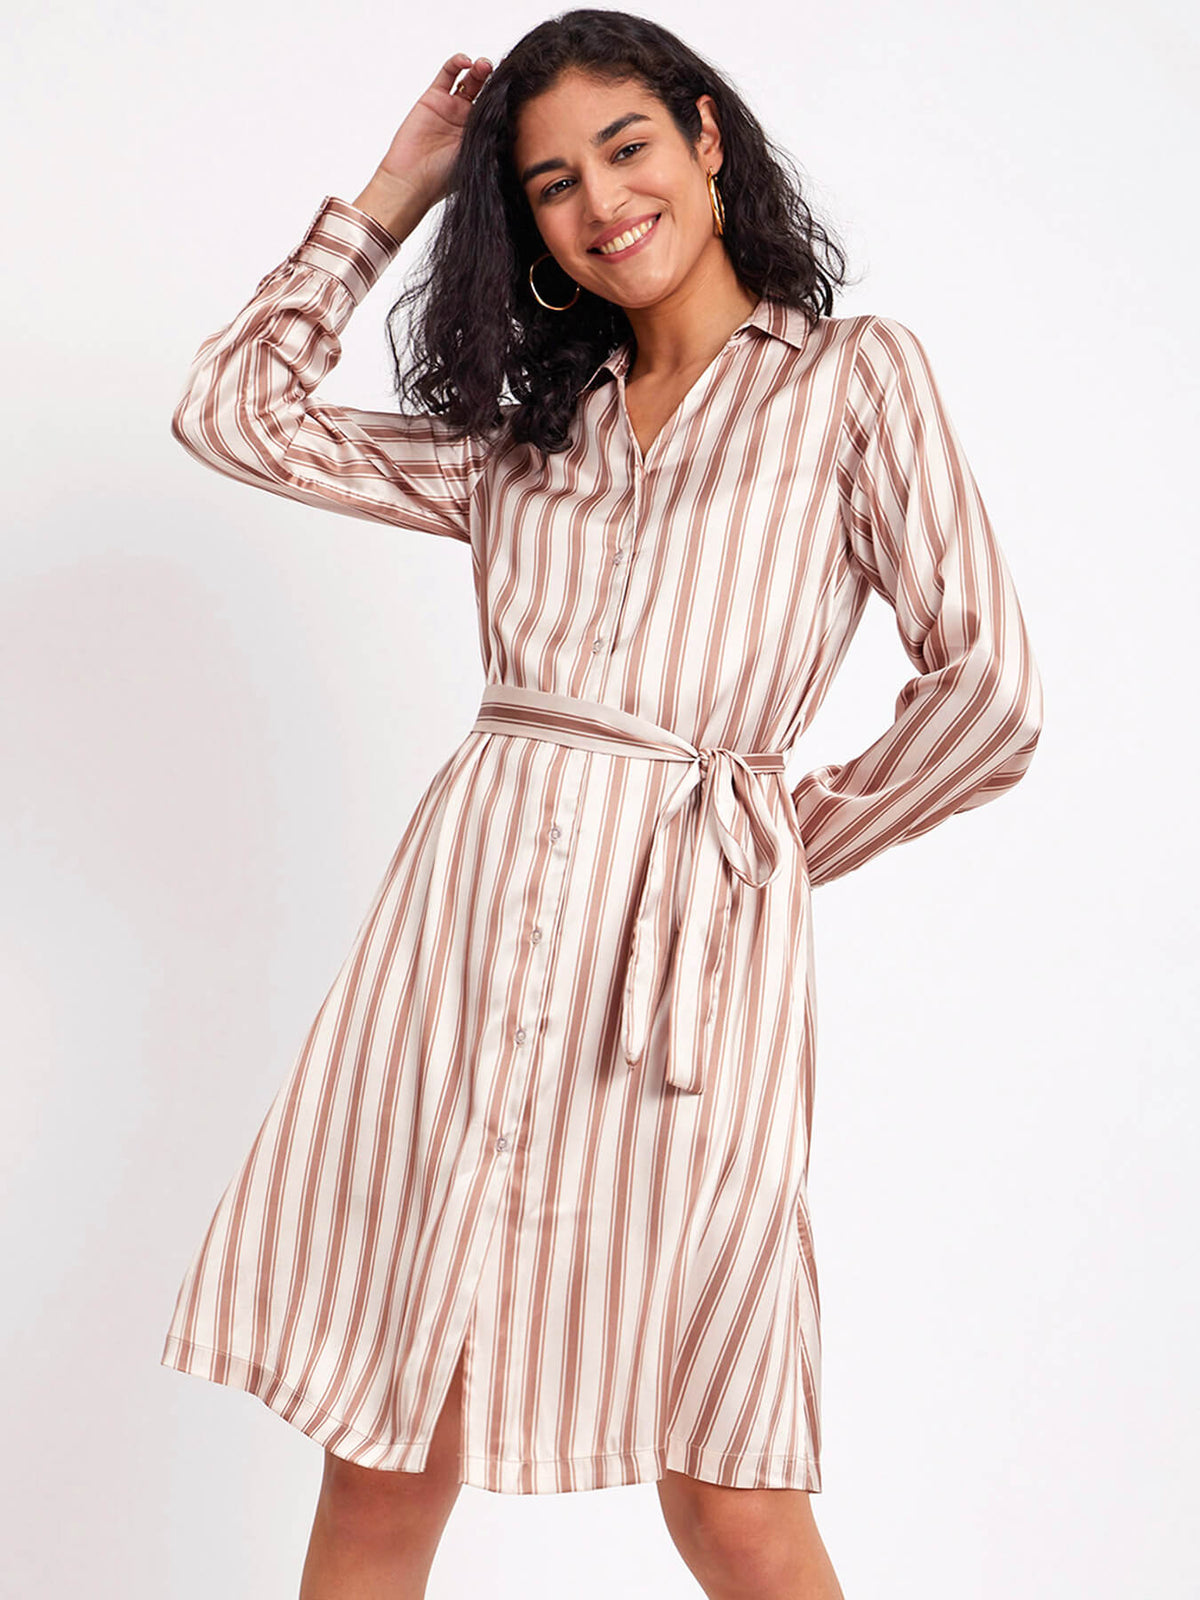 Satin Striped Dress - Beige And Brown